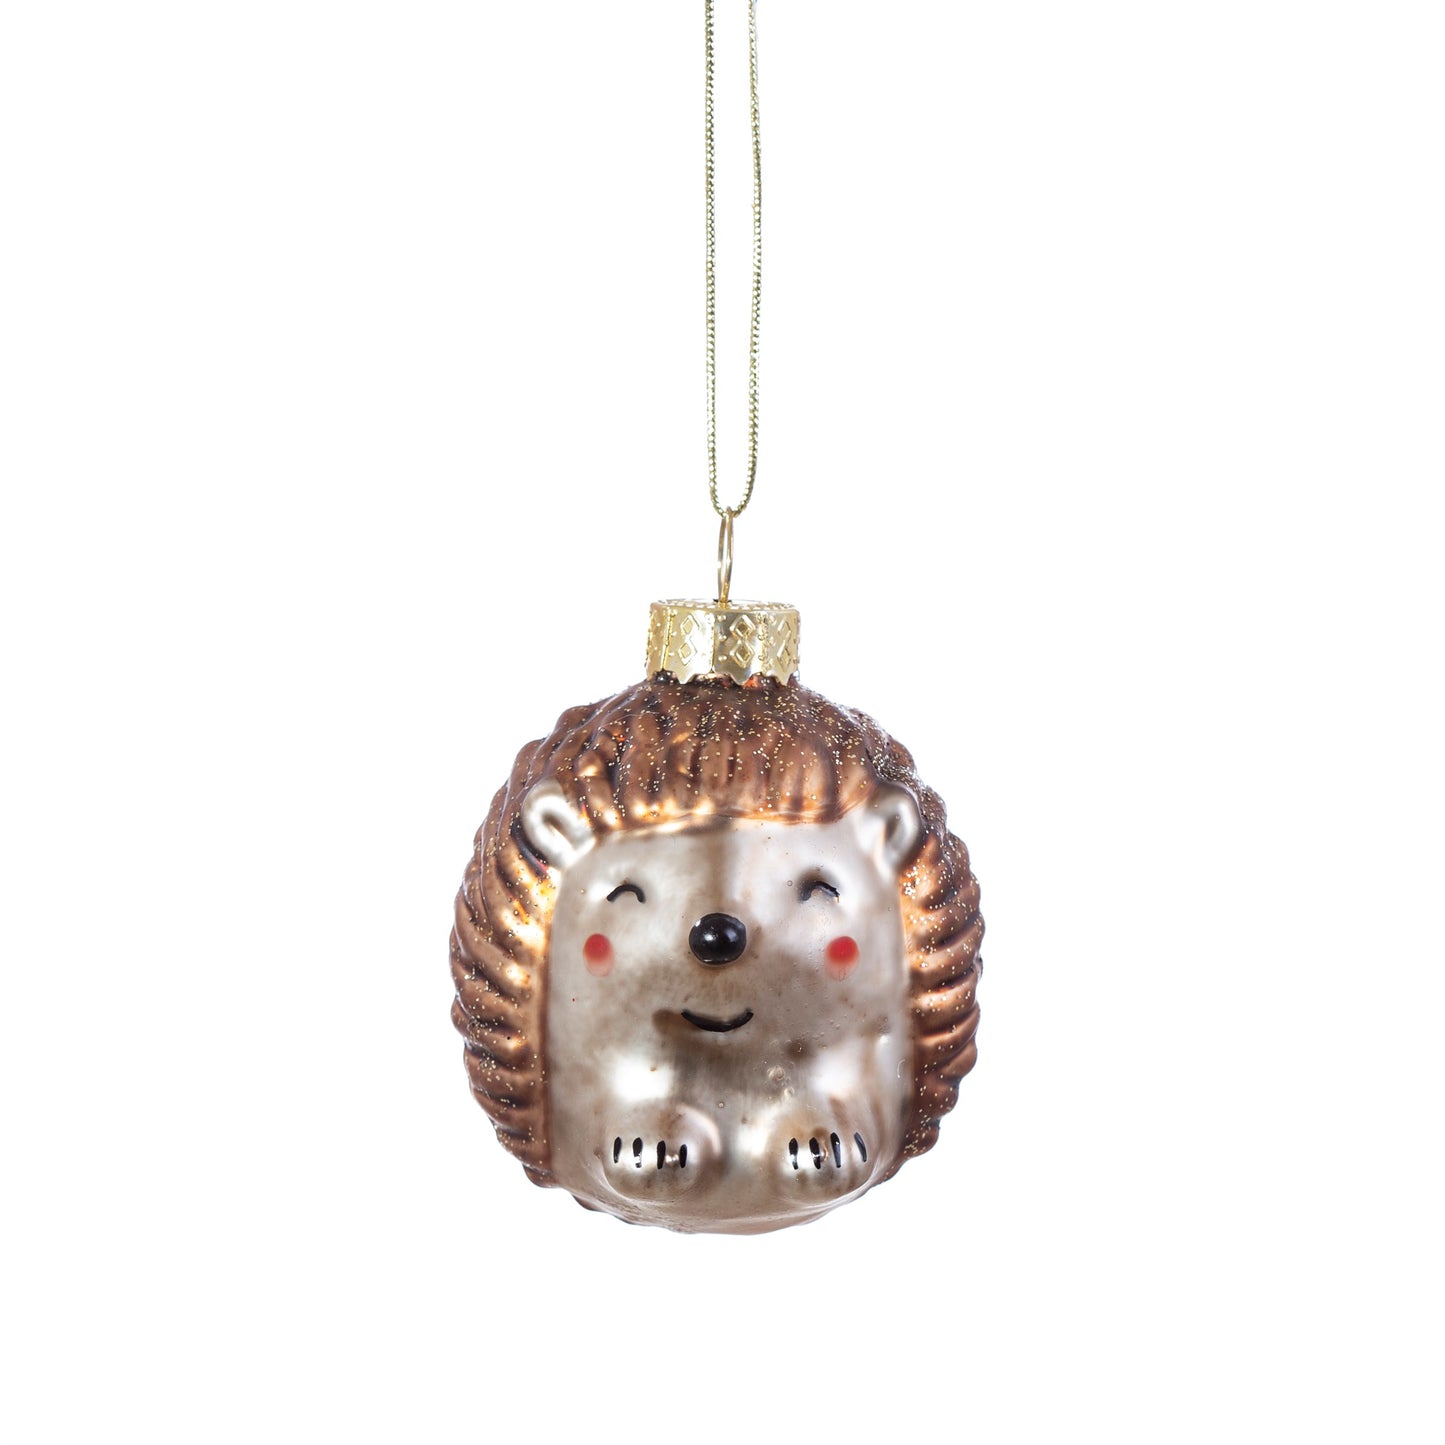 This extremely cute baby hedgehog glass Christmas decoration will definitely melt some hearts this festive season! How about creating a magical woodland theme this year?